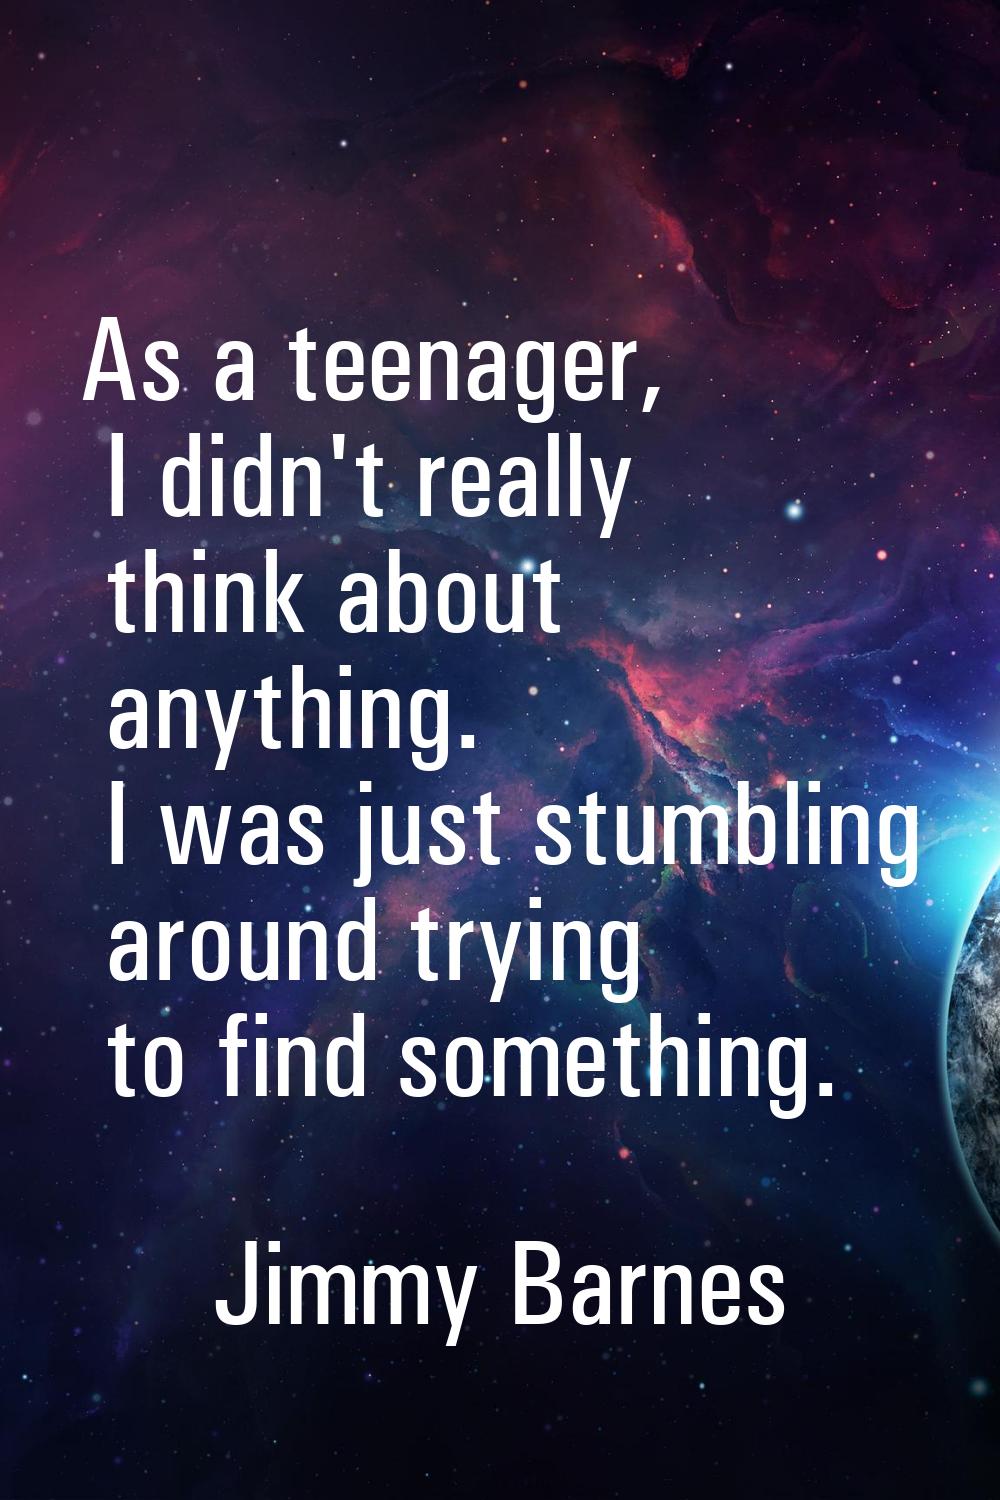 As a teenager, I didn't really think about anything. I was just stumbling around trying to find som